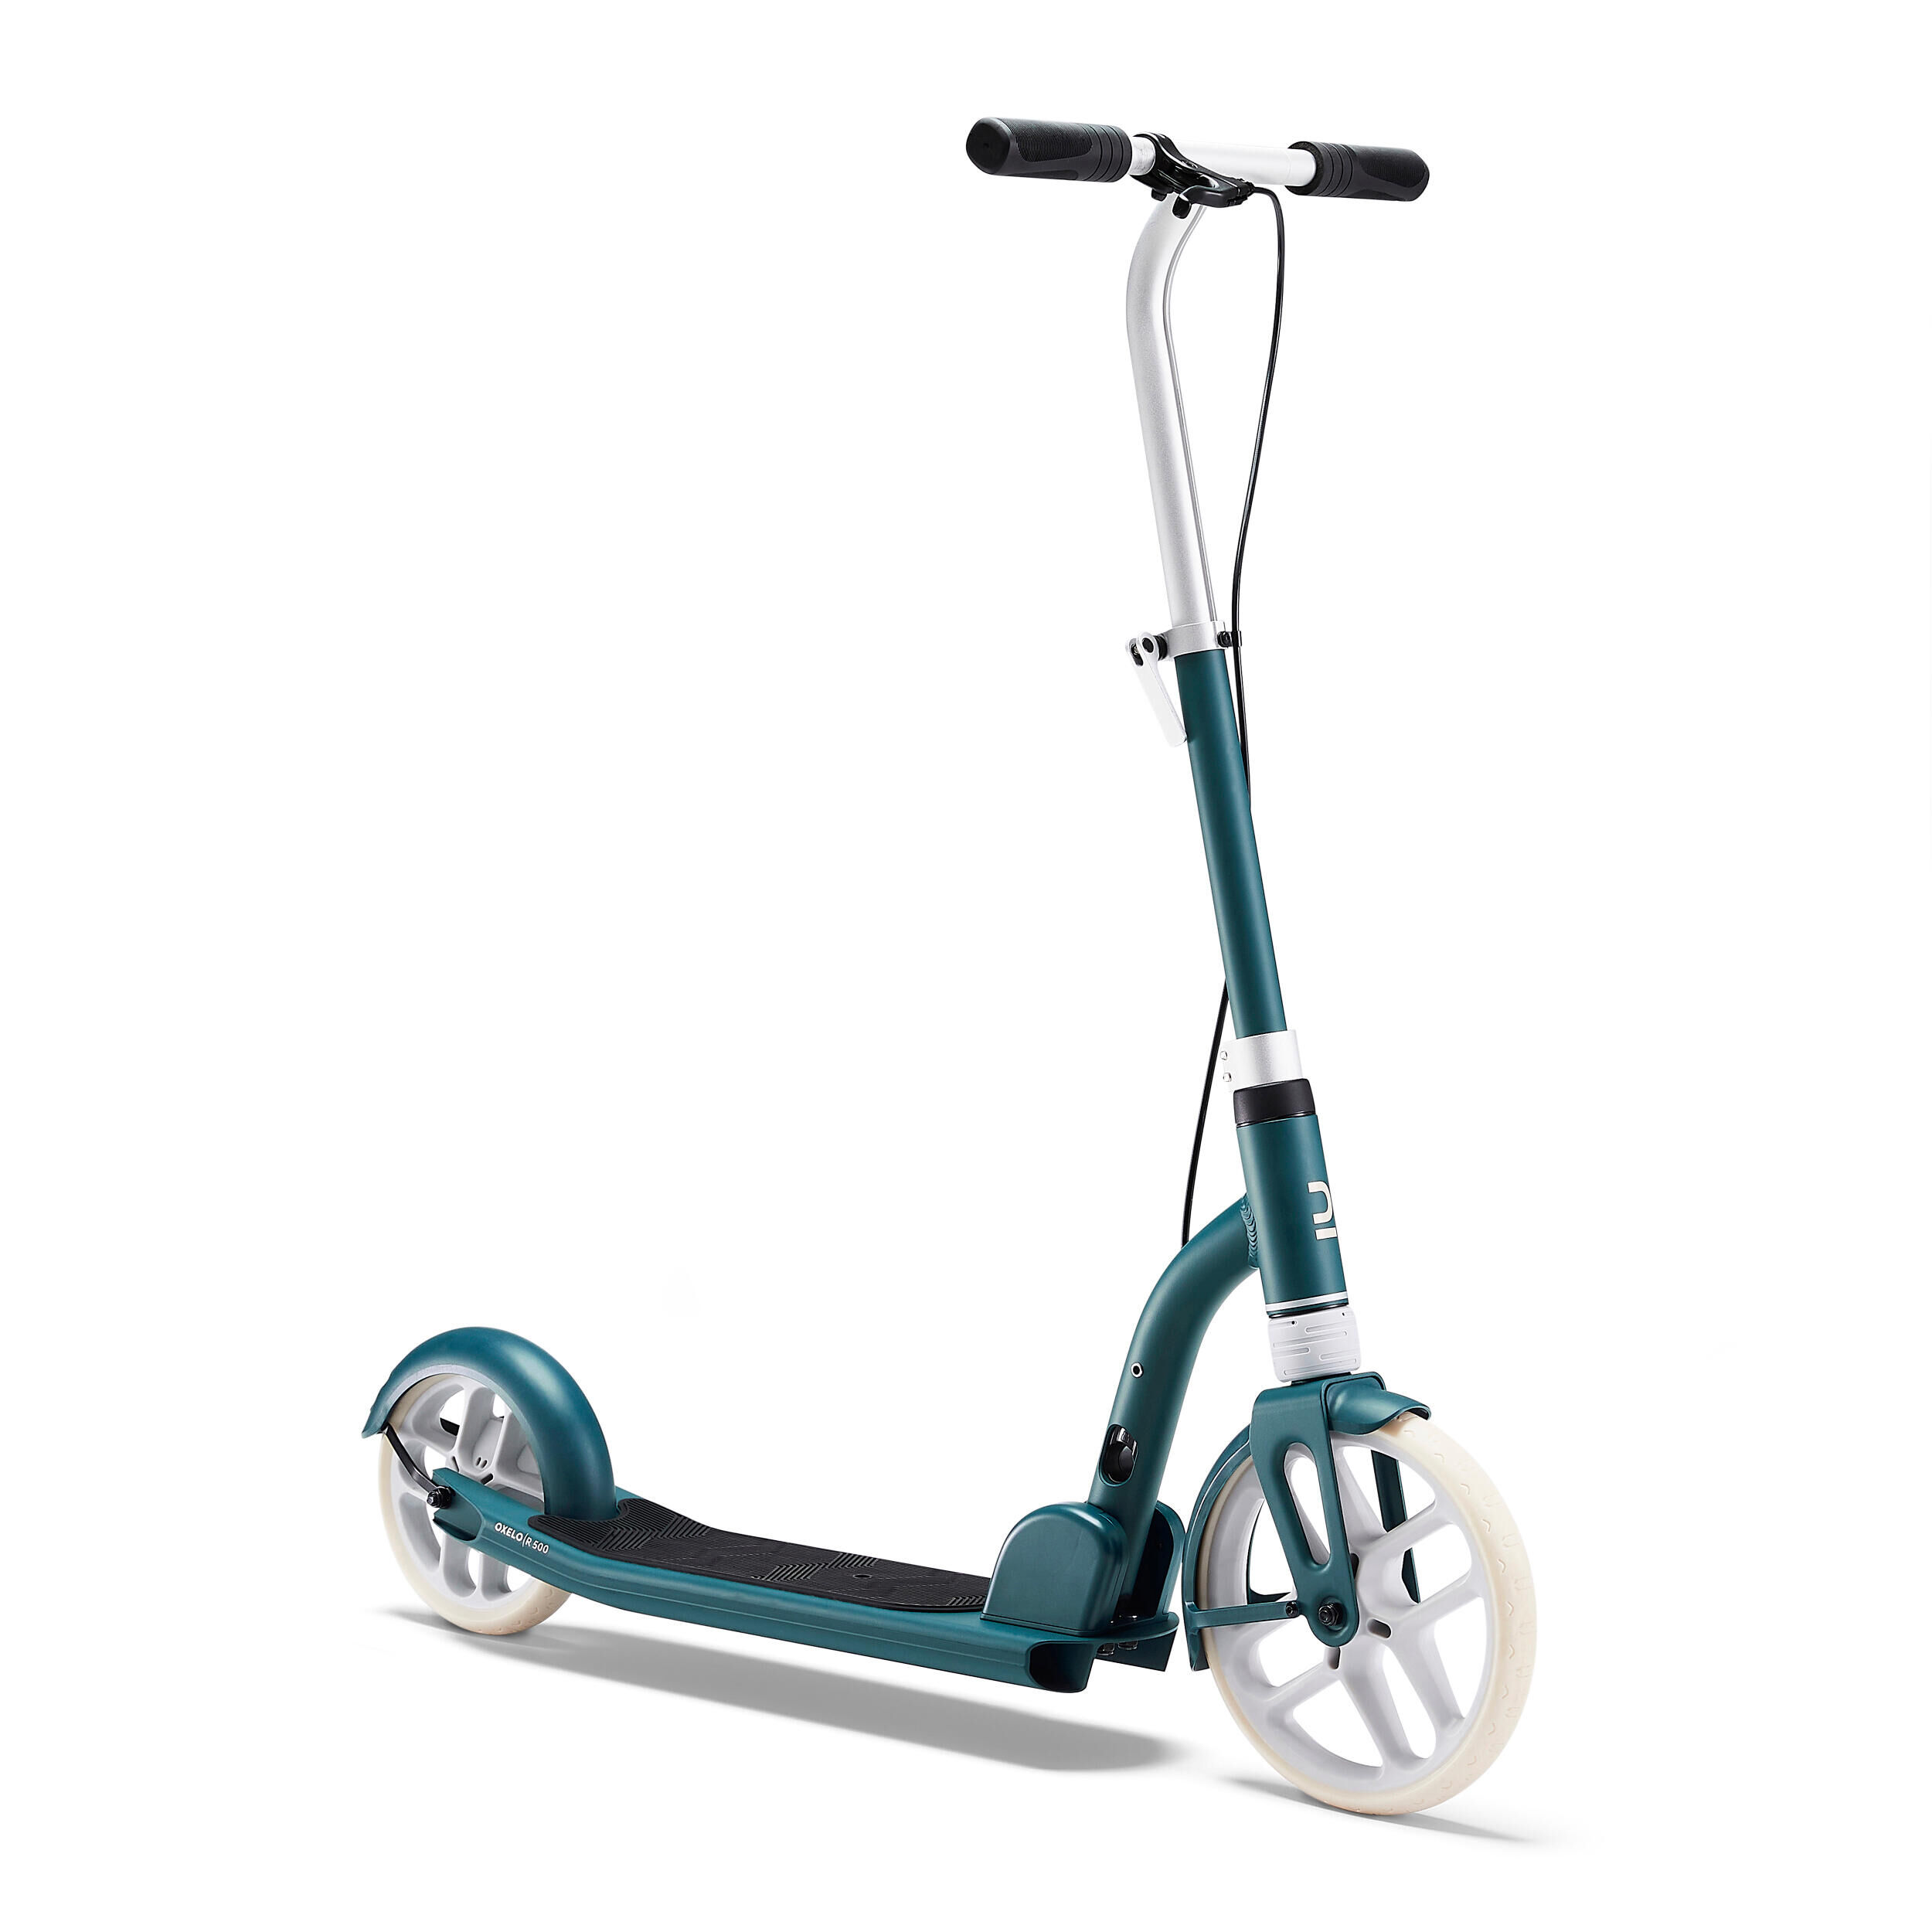 OXELO Adult Scooter R500 - Petrol